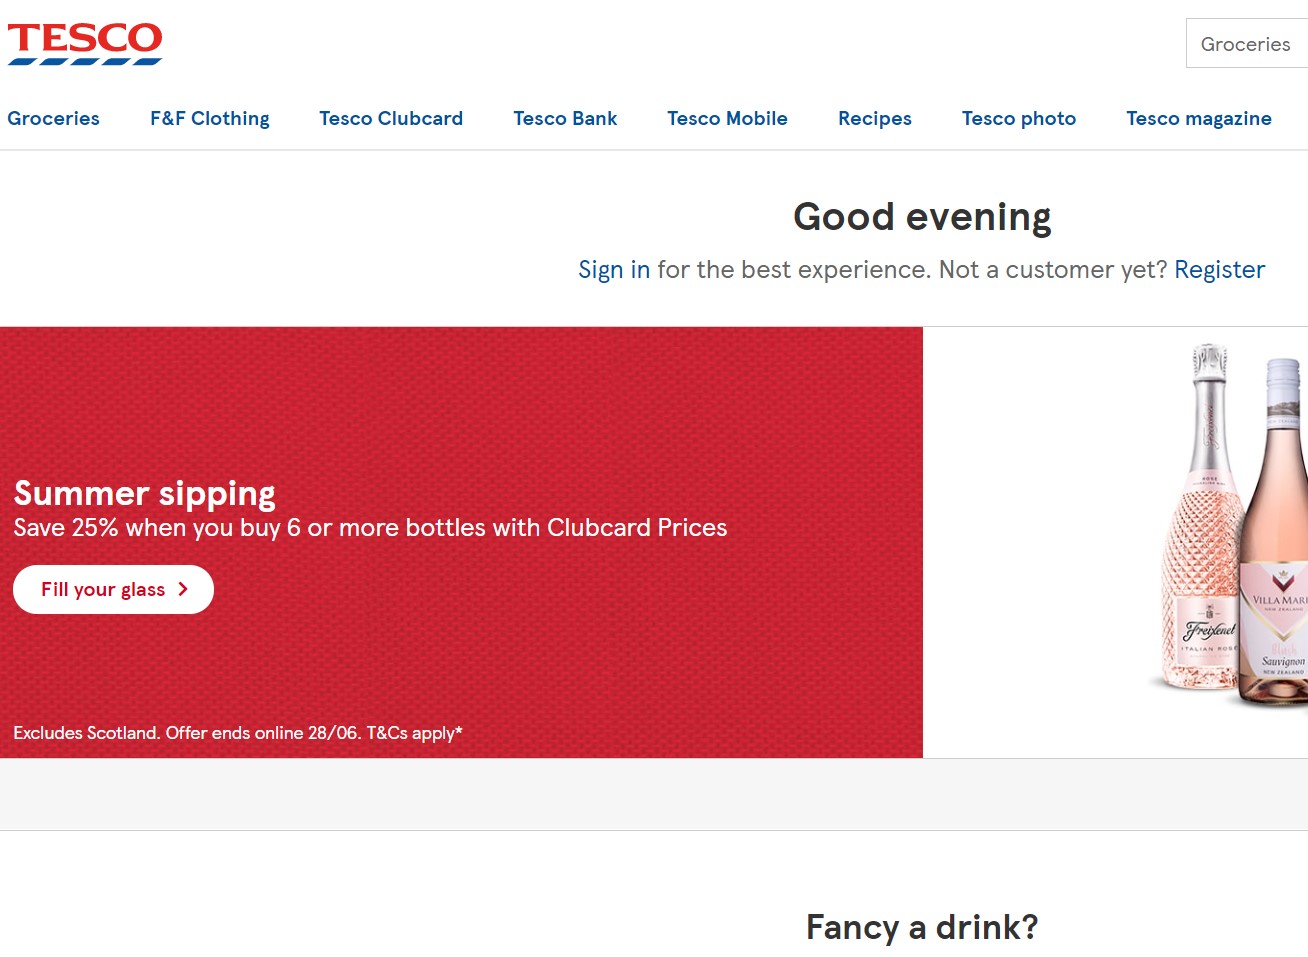 PayslipView: Guide to View Tesco Payslip Online